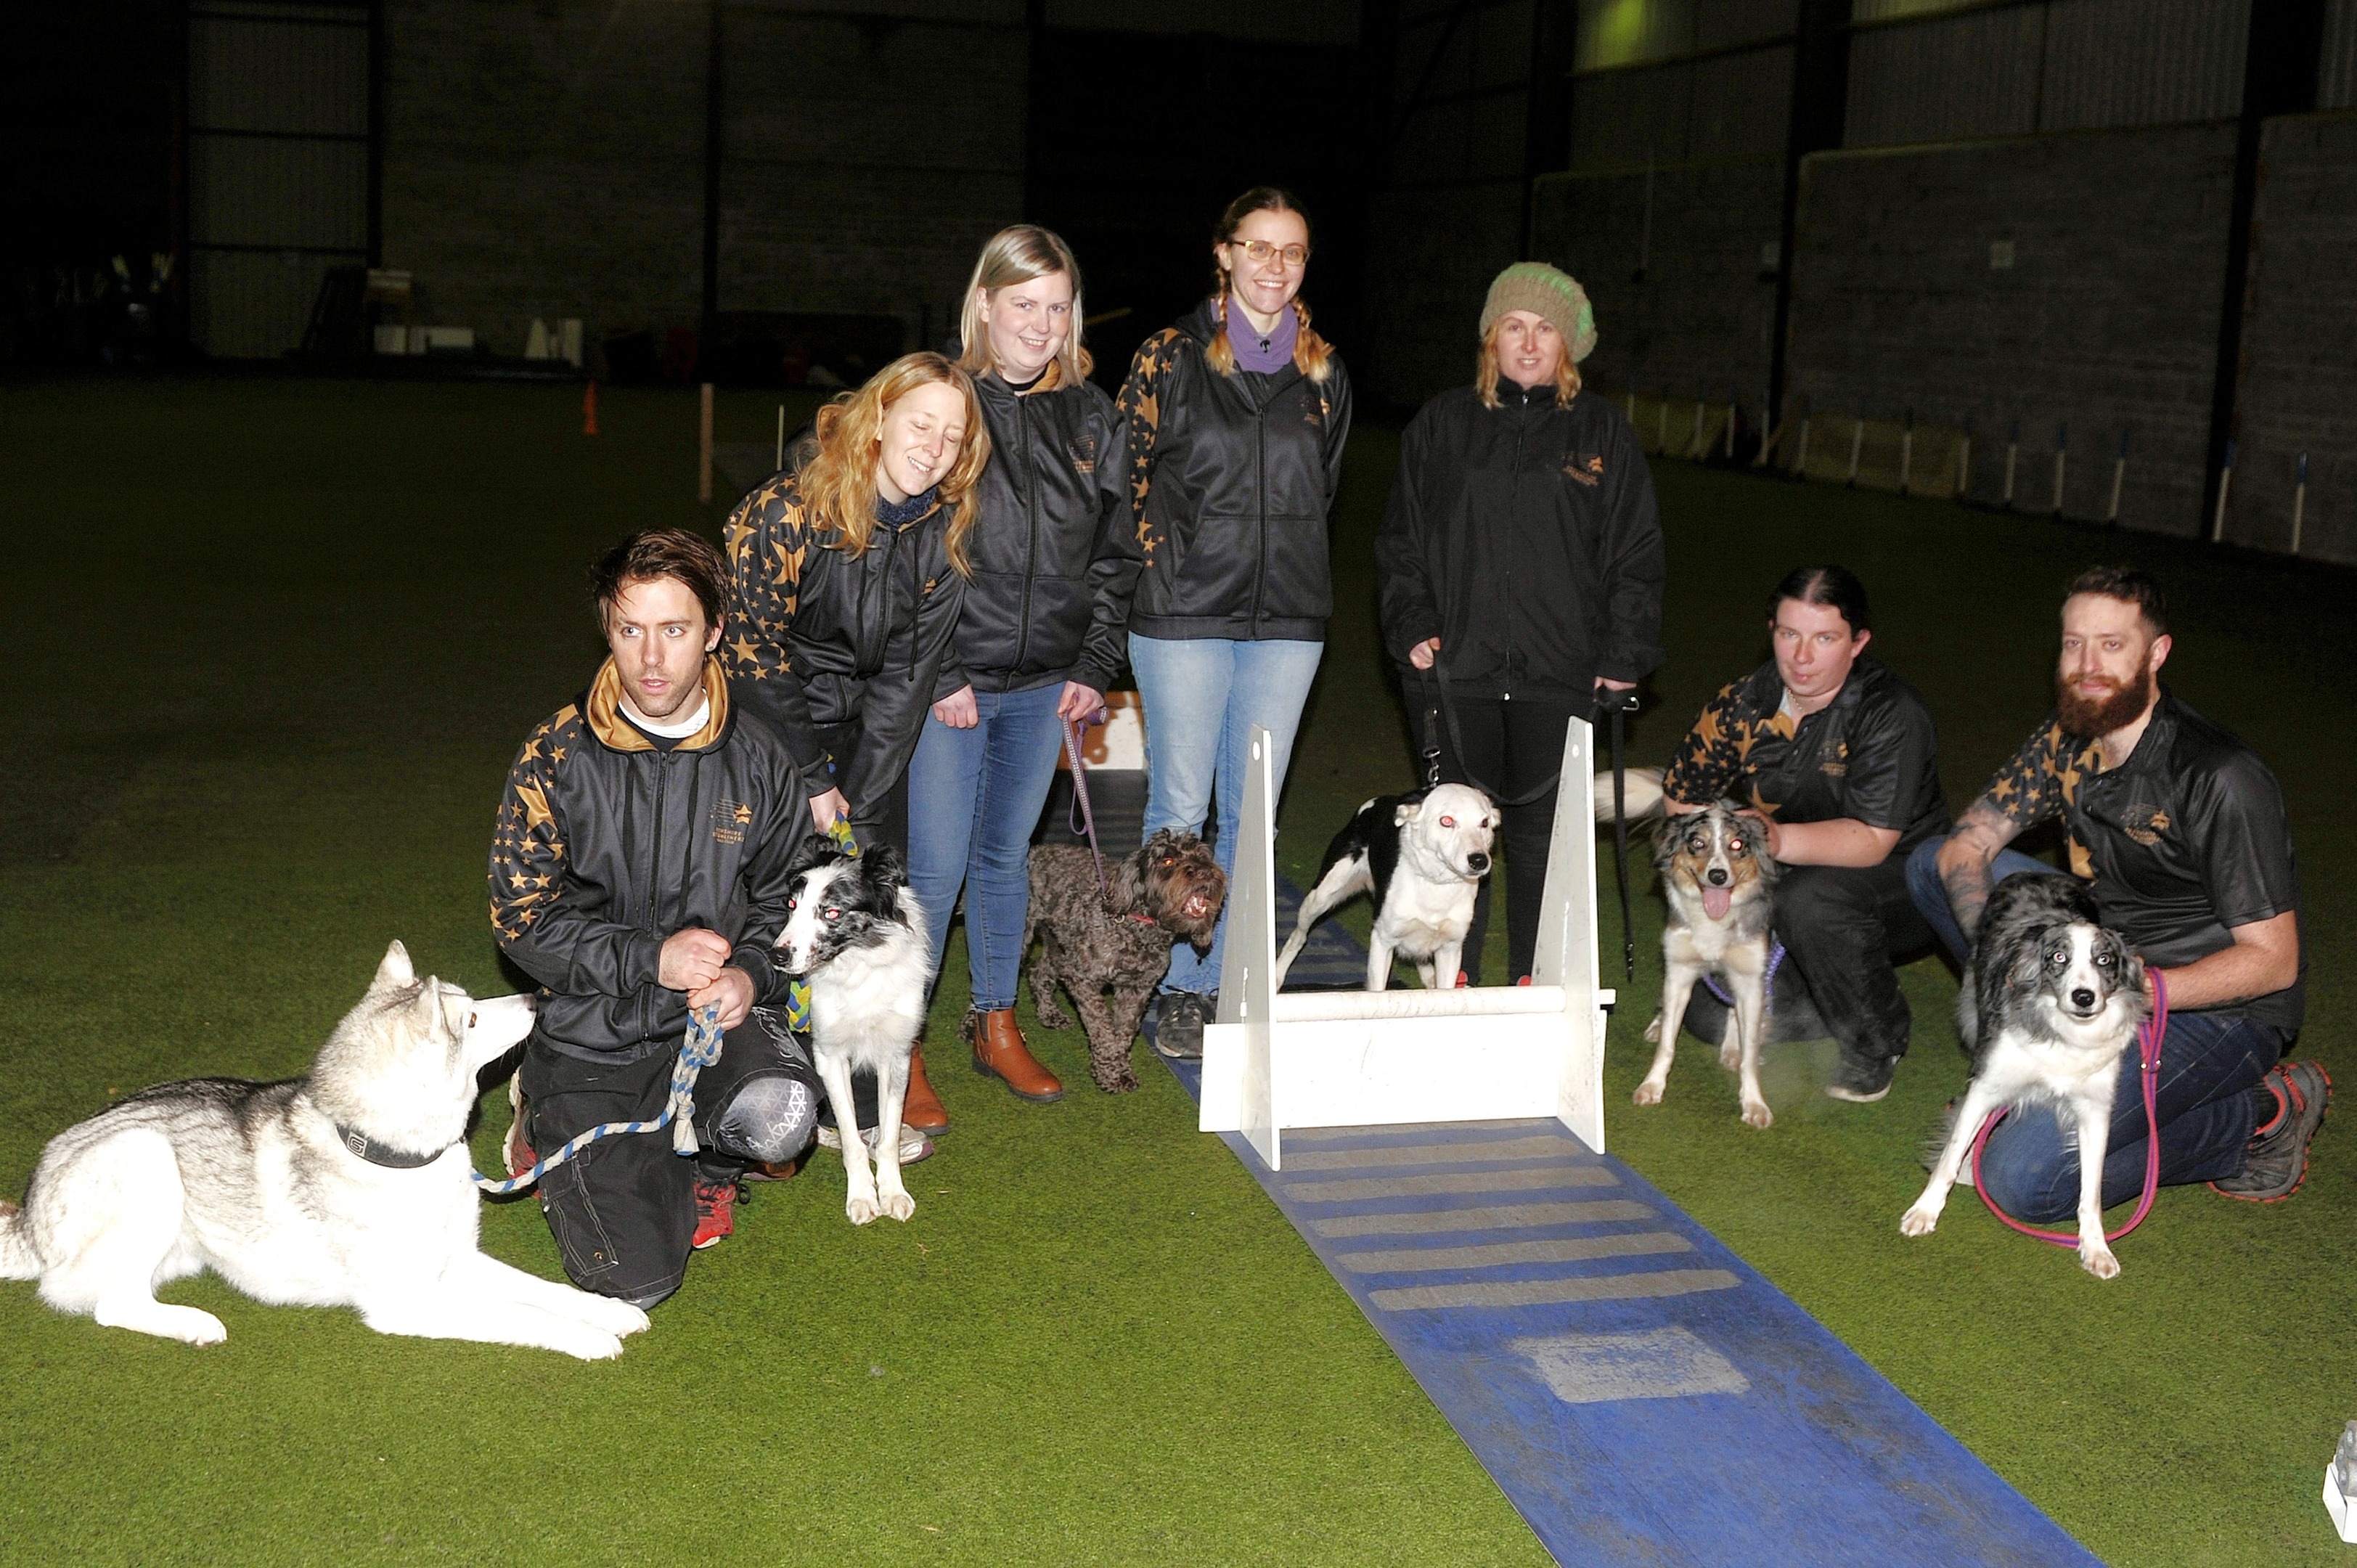 Perthshire Streamliners have qualified to compete at Crufts. Picture Shows; the team l to r - George Kennedy with Nero, Elaine Kennedy with Orion, Natasha Derkacz with Rollo, the teams Box Loader, Katherine Bastianelli, Linda Roger with Shep, Anna Hardie with Swift and Phil Wilkinson with Prada.